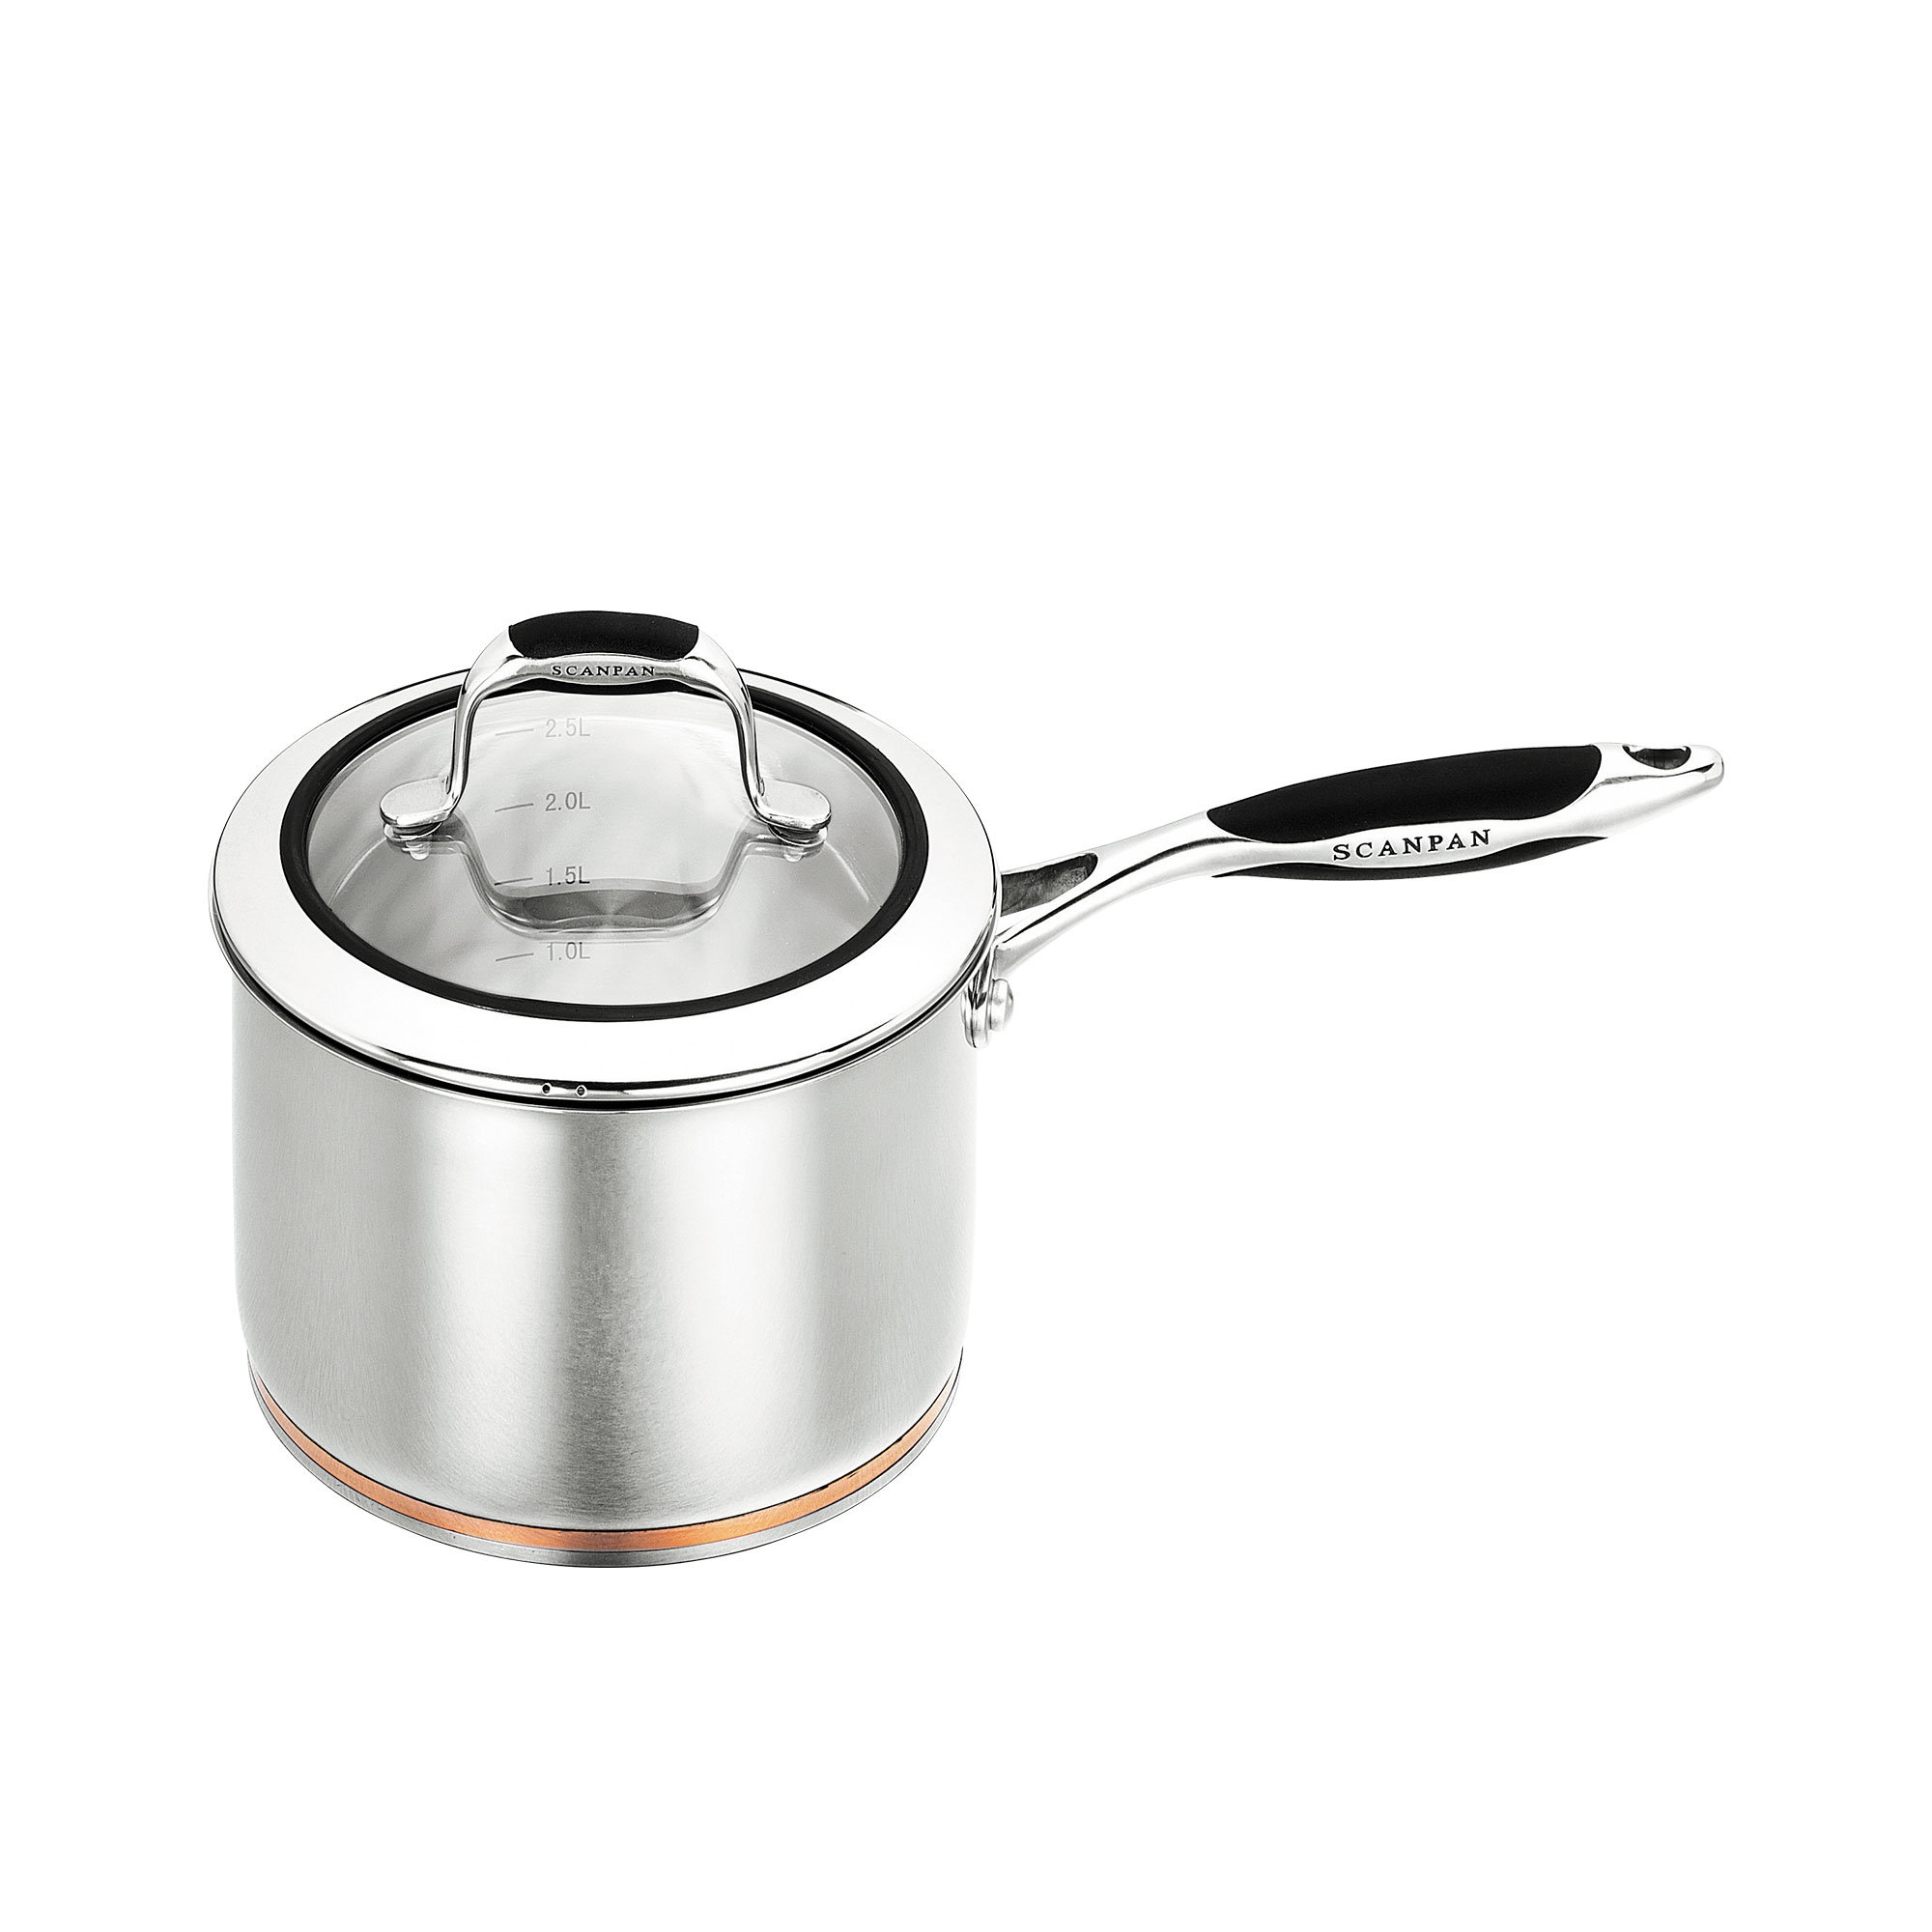 Scanpan Coppernox Stainless Steel Covered Saucepan 18cm - 2.5L Image 1